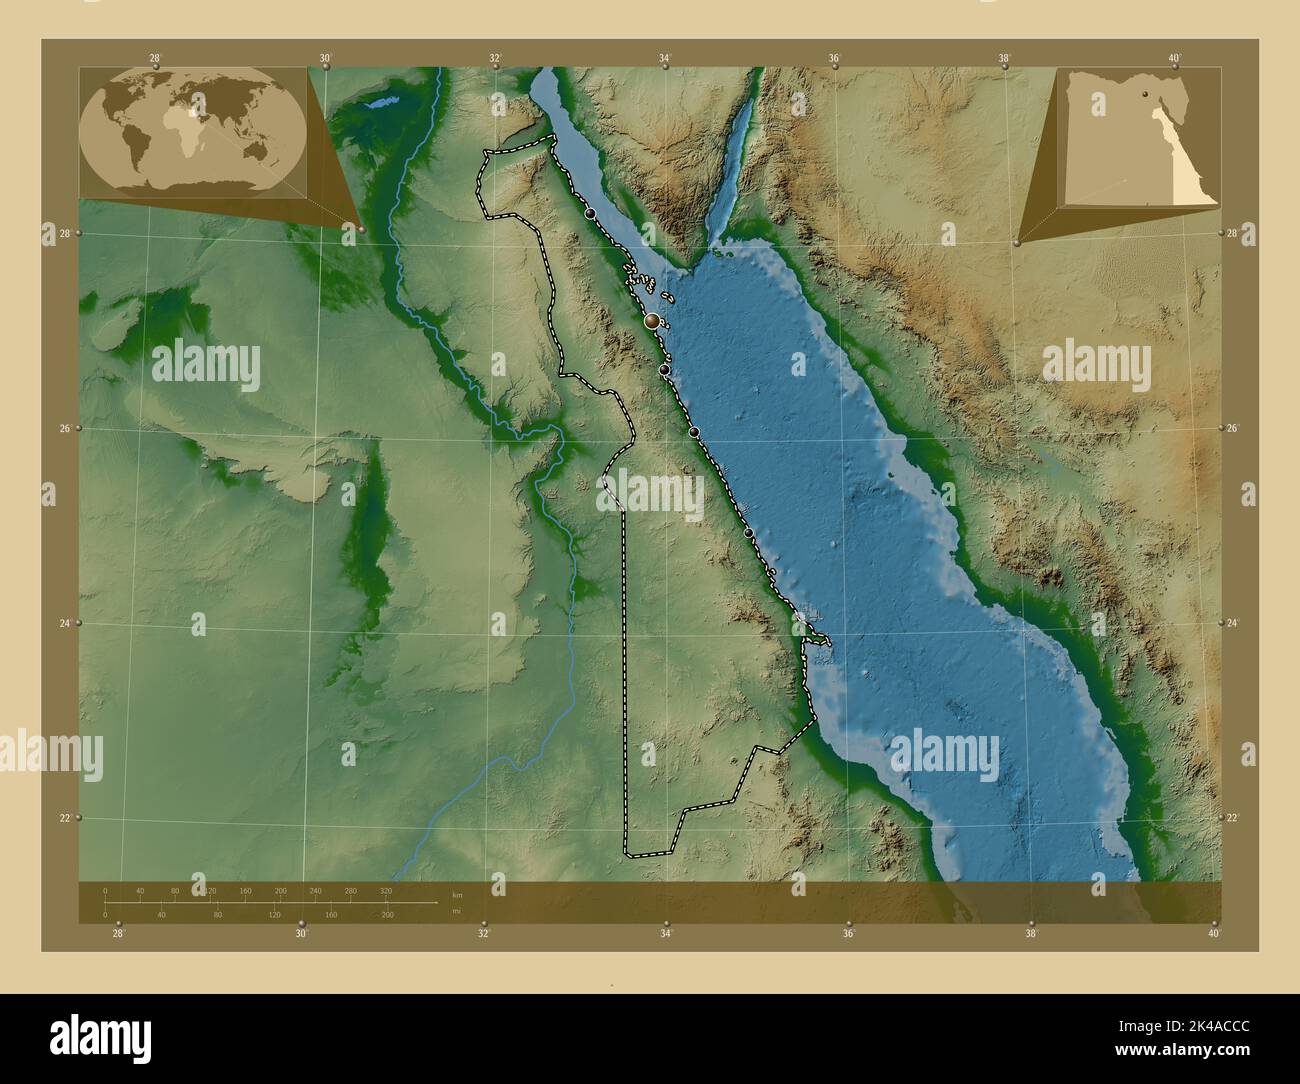 Al Bahr al Ahmar, governorate of Egypt. Colored elevation map with lakes and rivers. Locations of major cities of the region. Corner auxiliary locatio Stock Photo